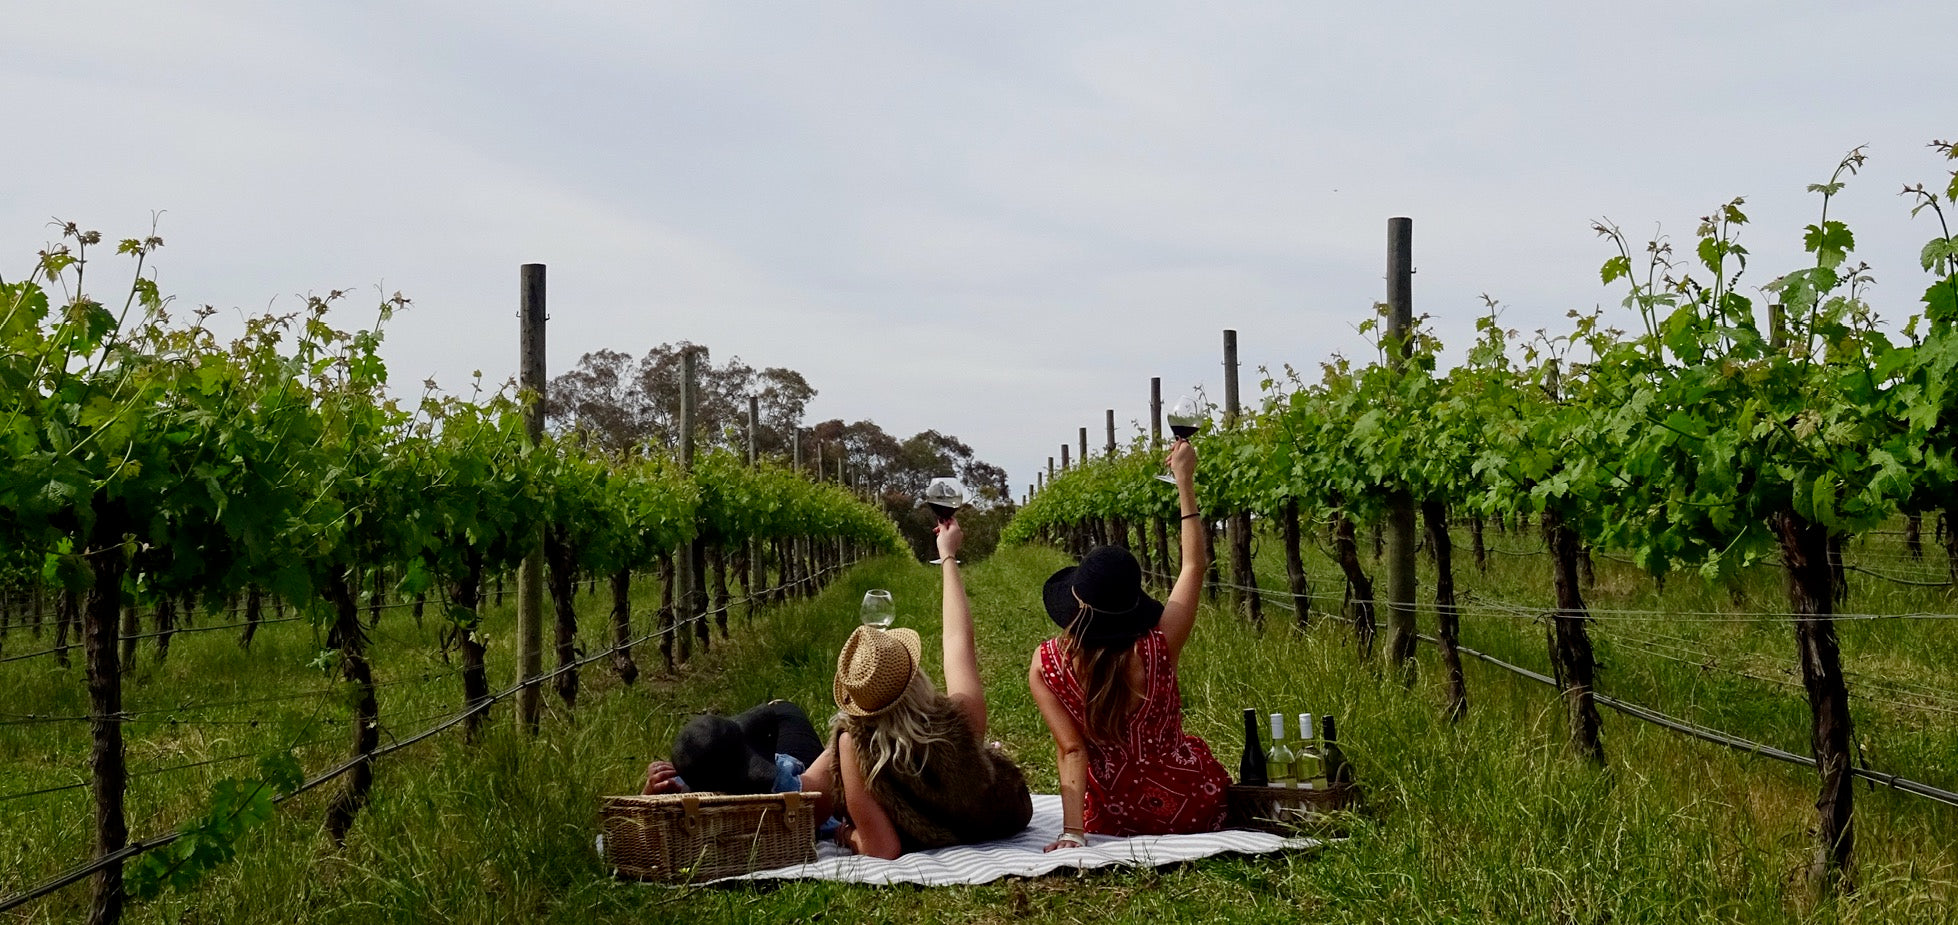 Krystallo Estate, Krystallo, Contact Us, High Country Victoria, Get In Touch, Winery, High Country Winery, Contact Us